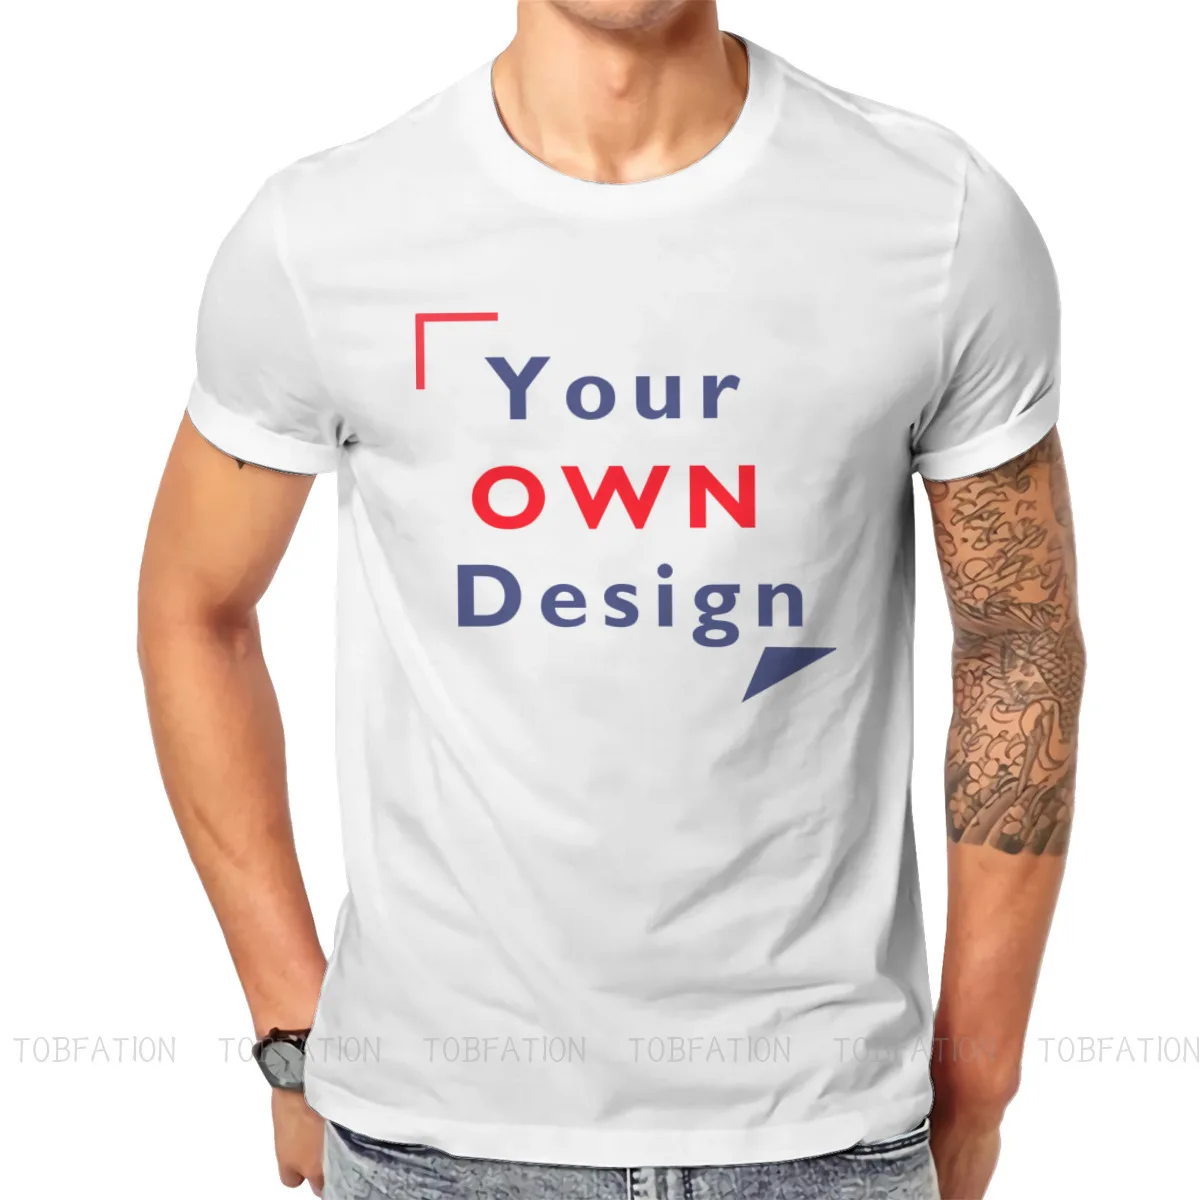 

Your Own Design Man's TShirt Custom Customize Unique Exclusive Gift Giving Crewneck Tops Fabric T Shirt Top Quality Gift Idea